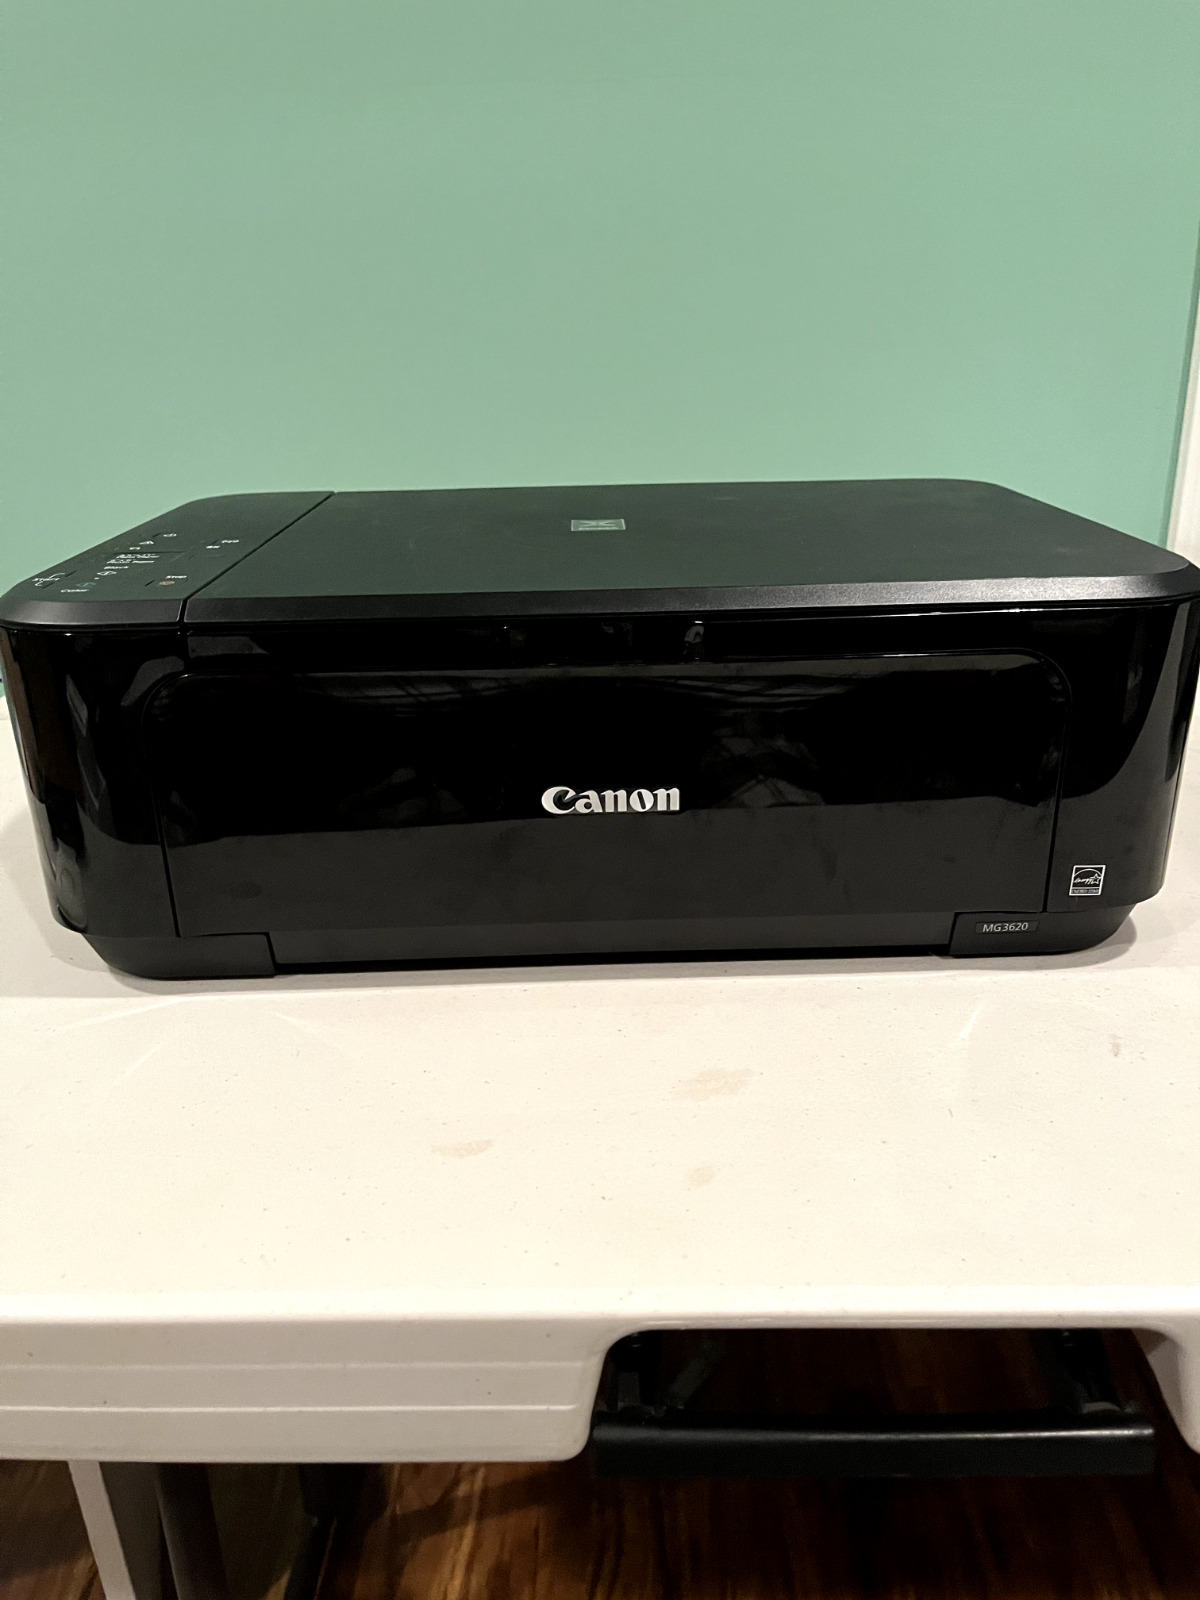 TESTED AND WORKING Canon Pixma MG3620 Inkjet All-In-One Printer